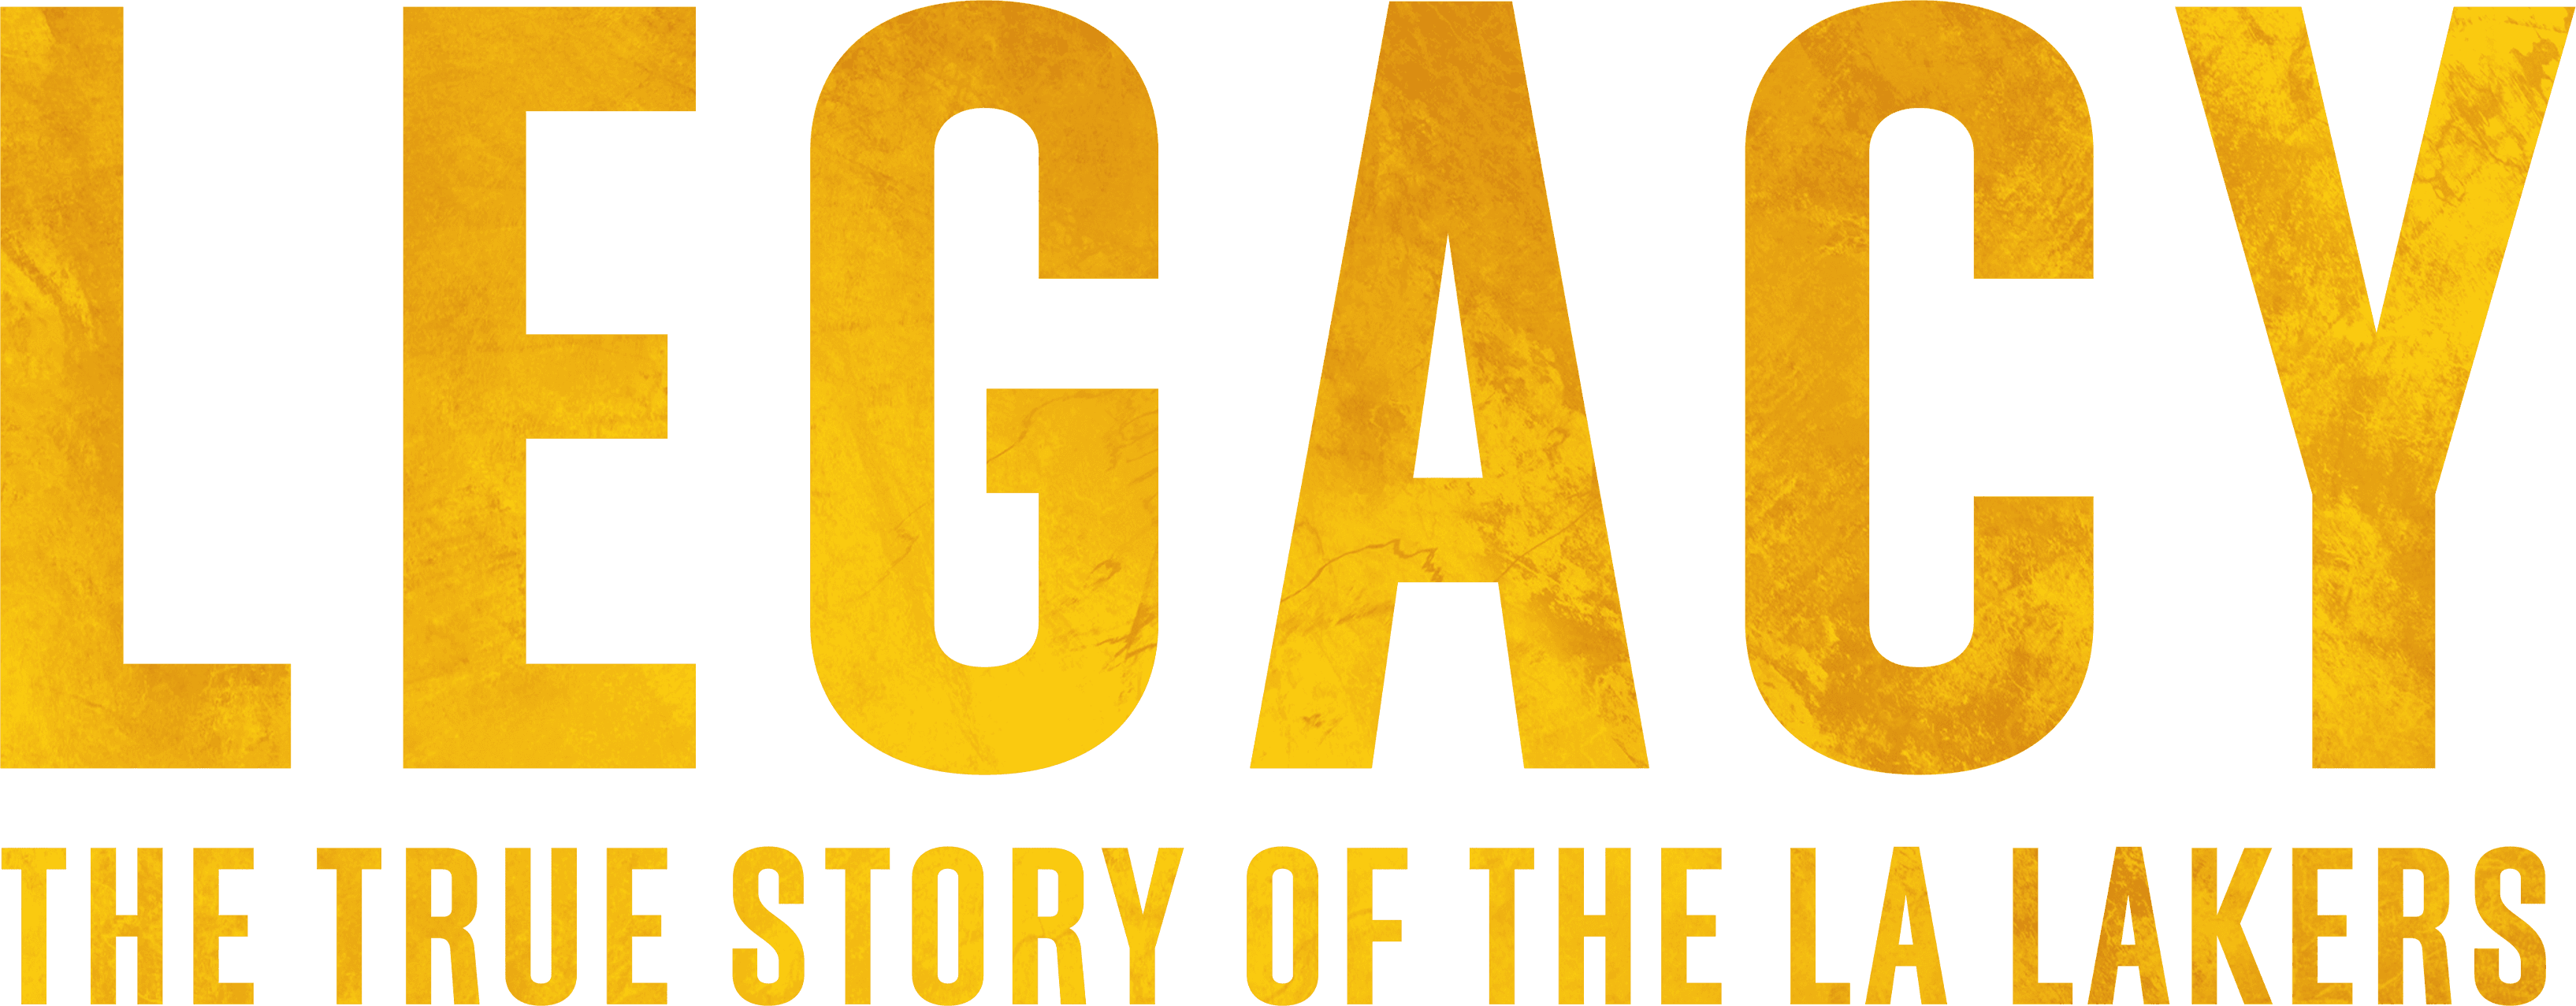 Legacy: The True Story of the LA Lakers logo